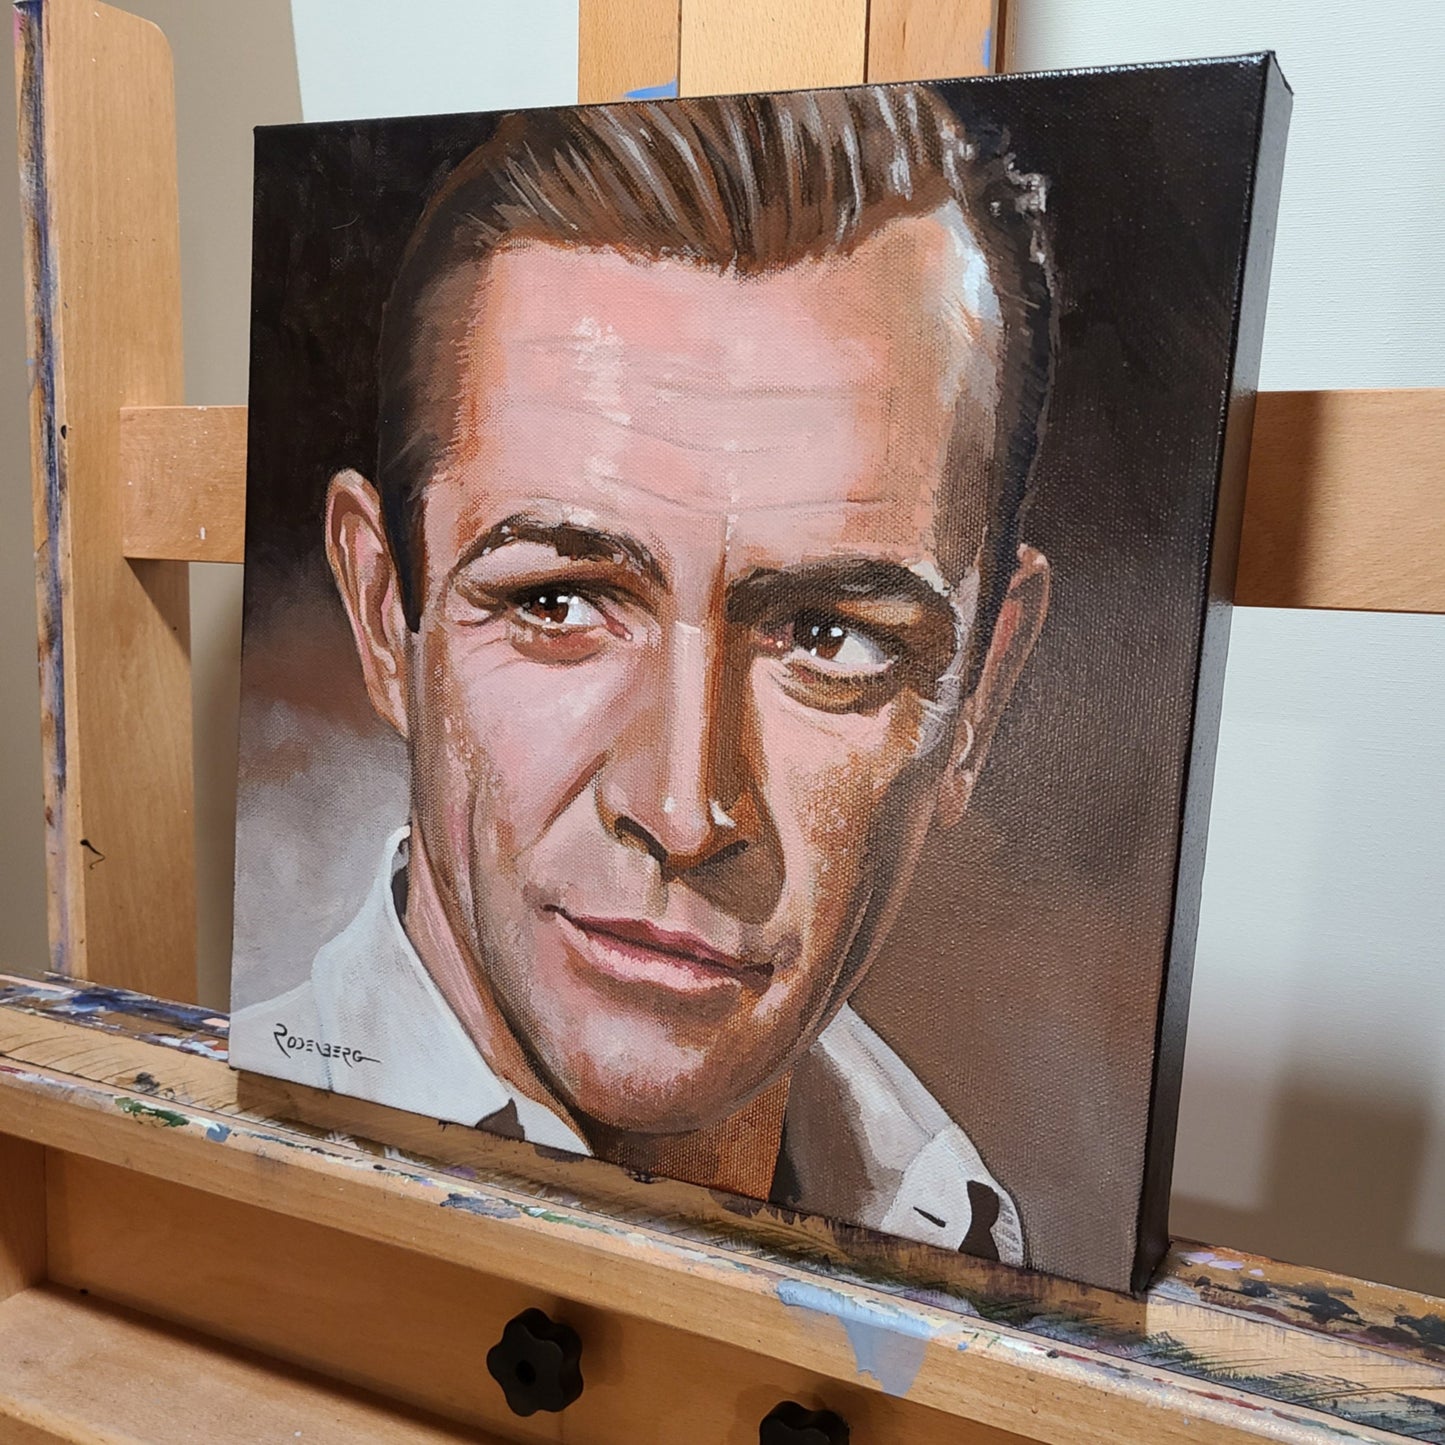 Sean Connery painting